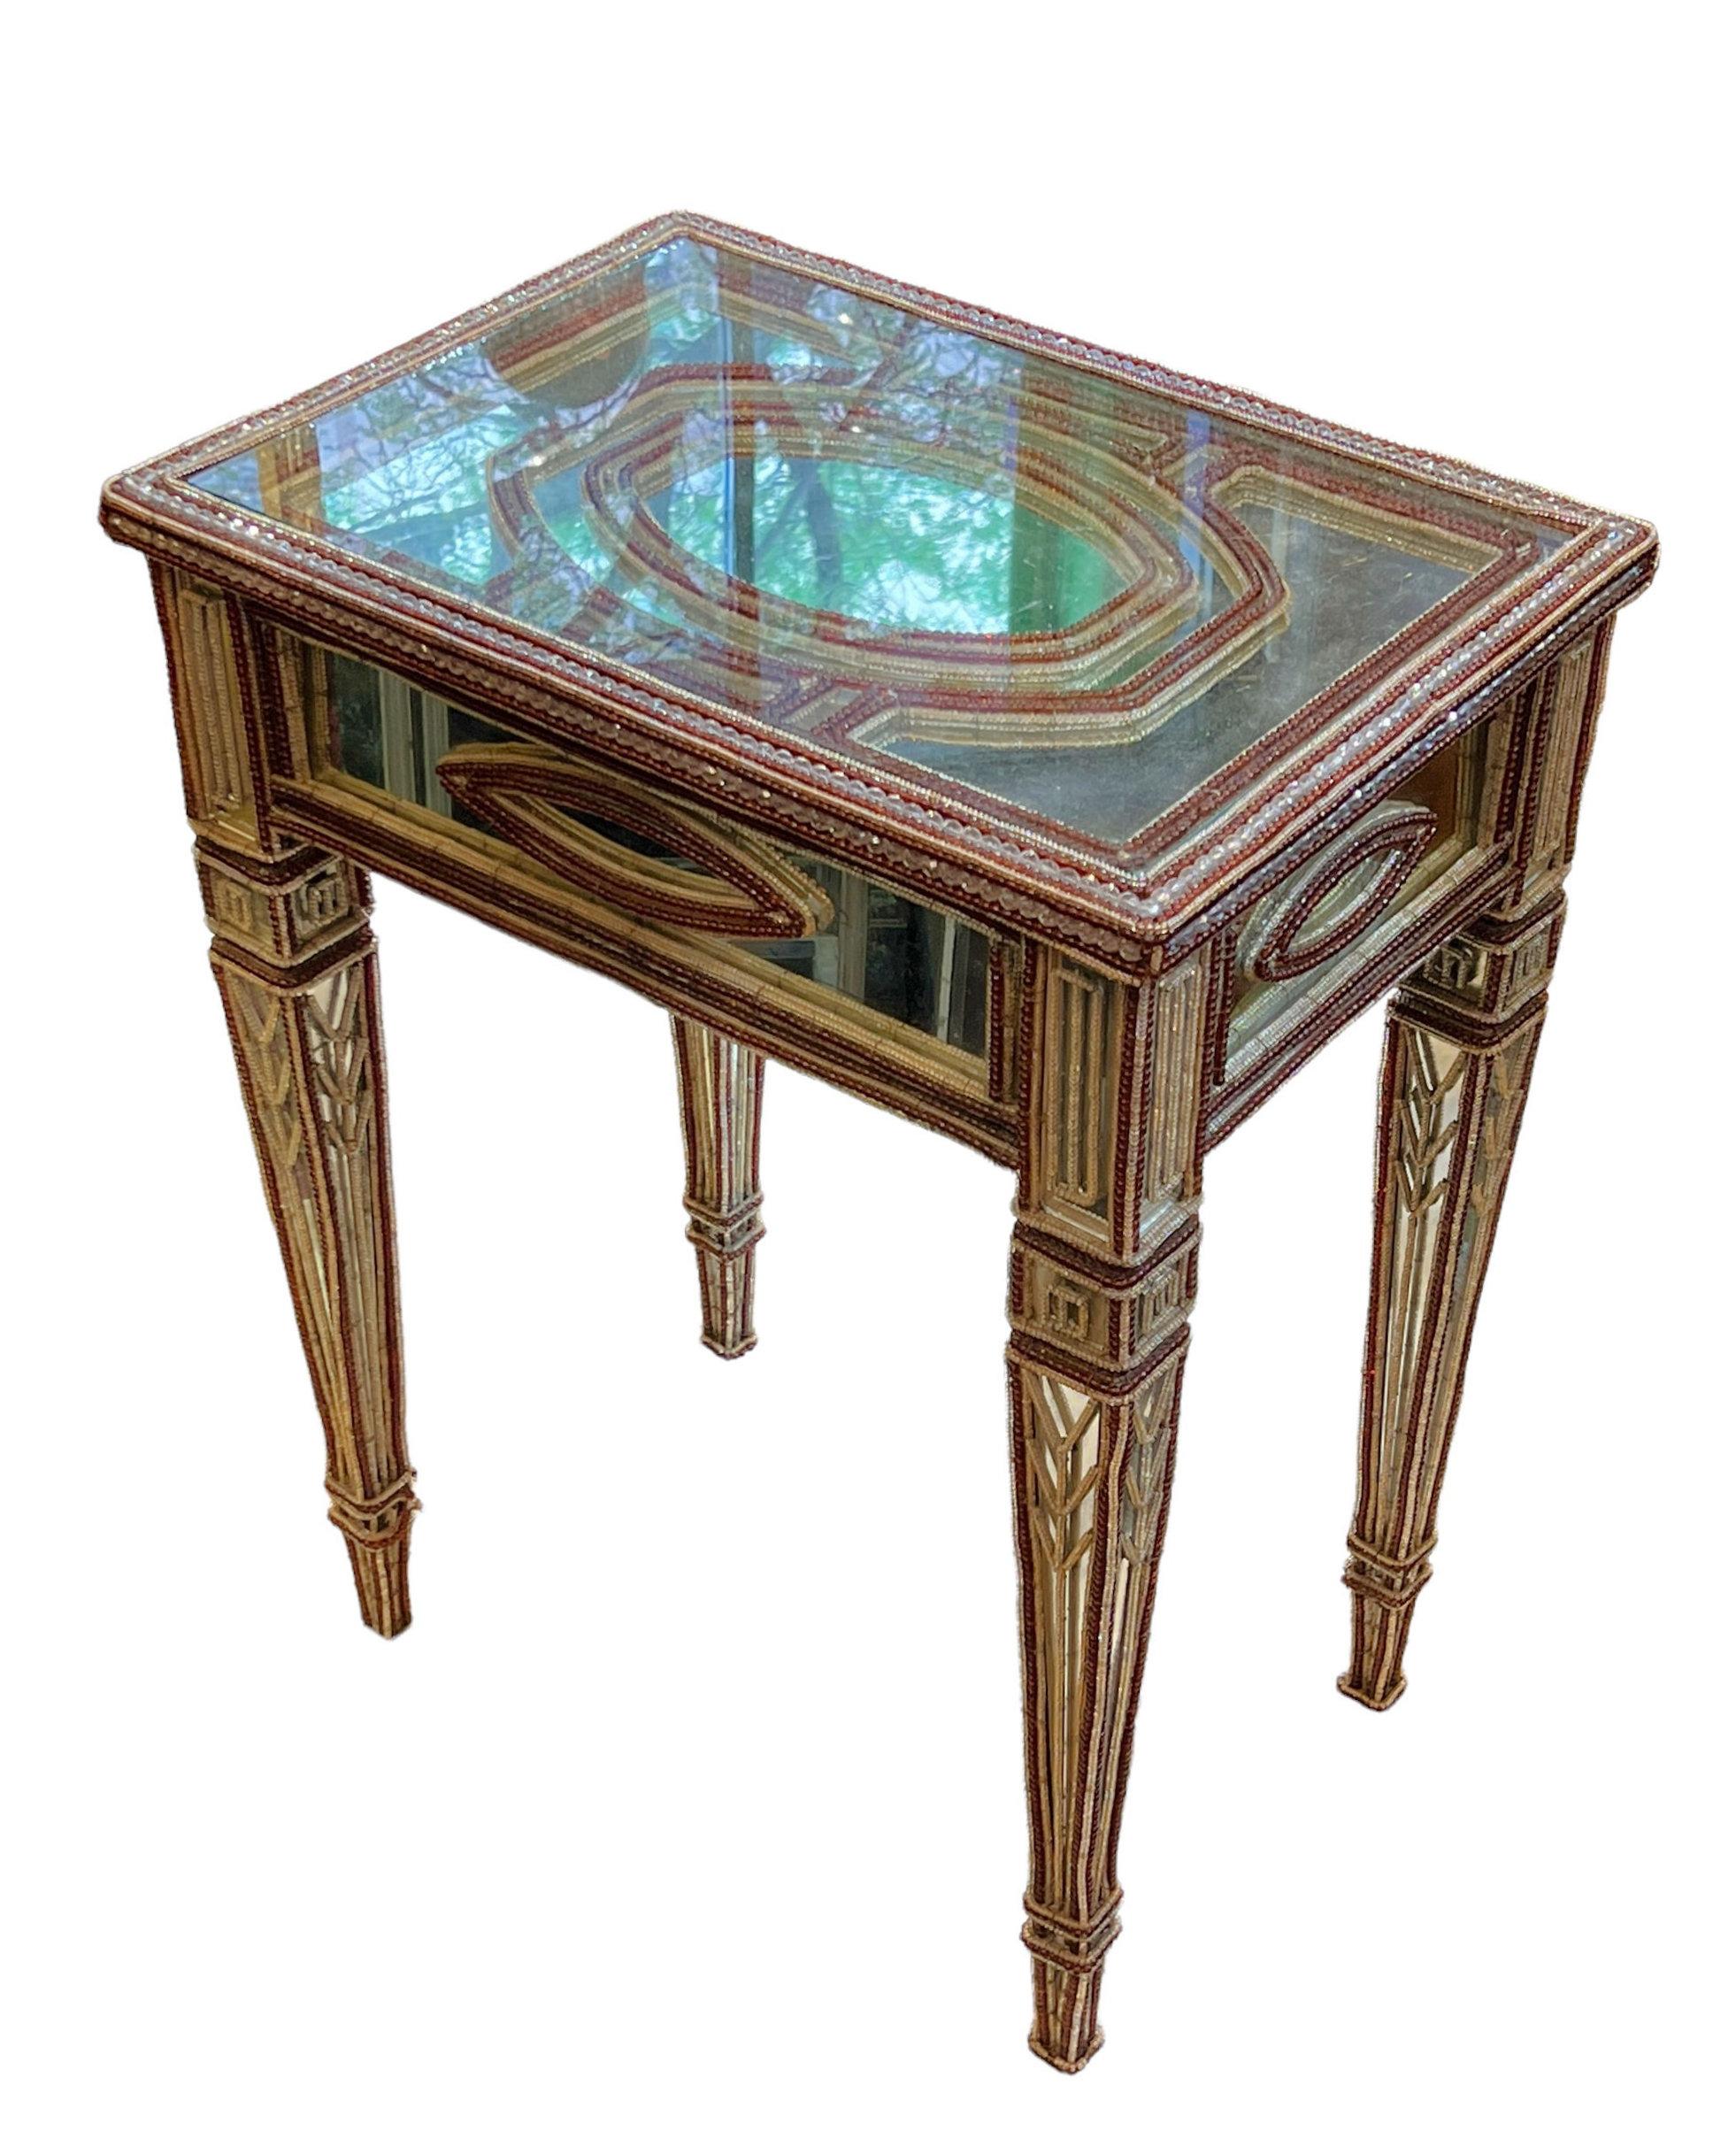 Our pair of side tables from the early 20th century feature mirrored surfaces on the tops and friezes, and extensive clear and ruby red colored glass beads. A classic design, but relatively rare. Each in good condition.